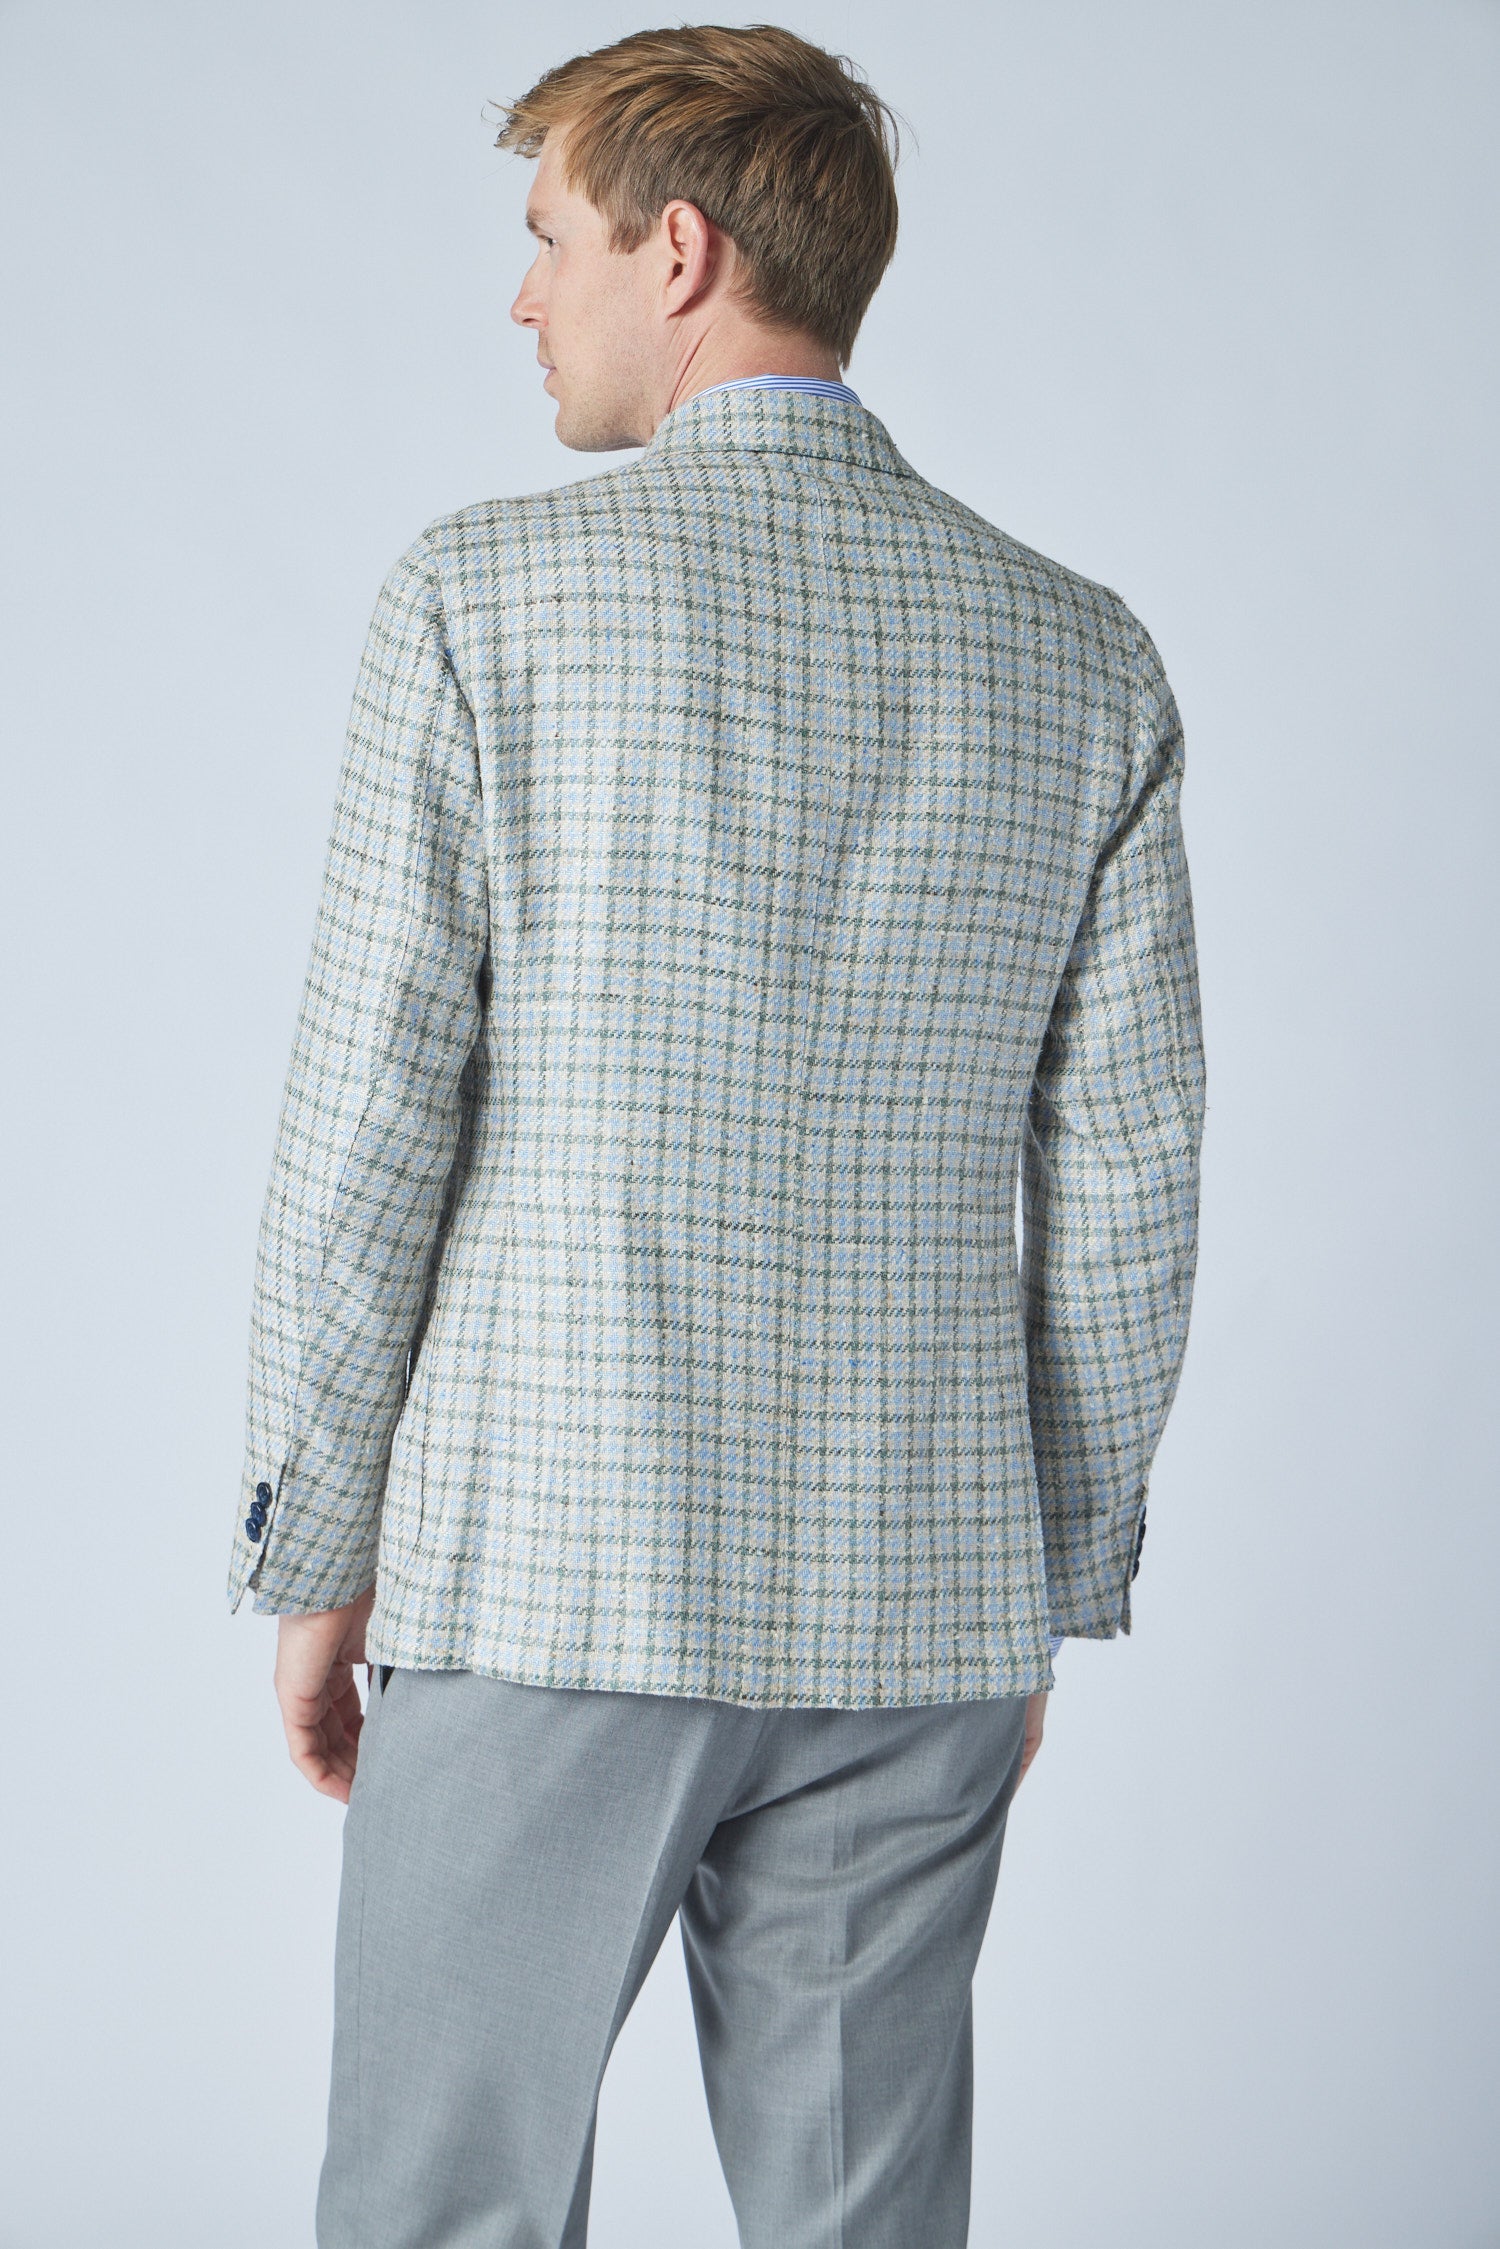 James Jacket in Tan with Blue/Green Plaid